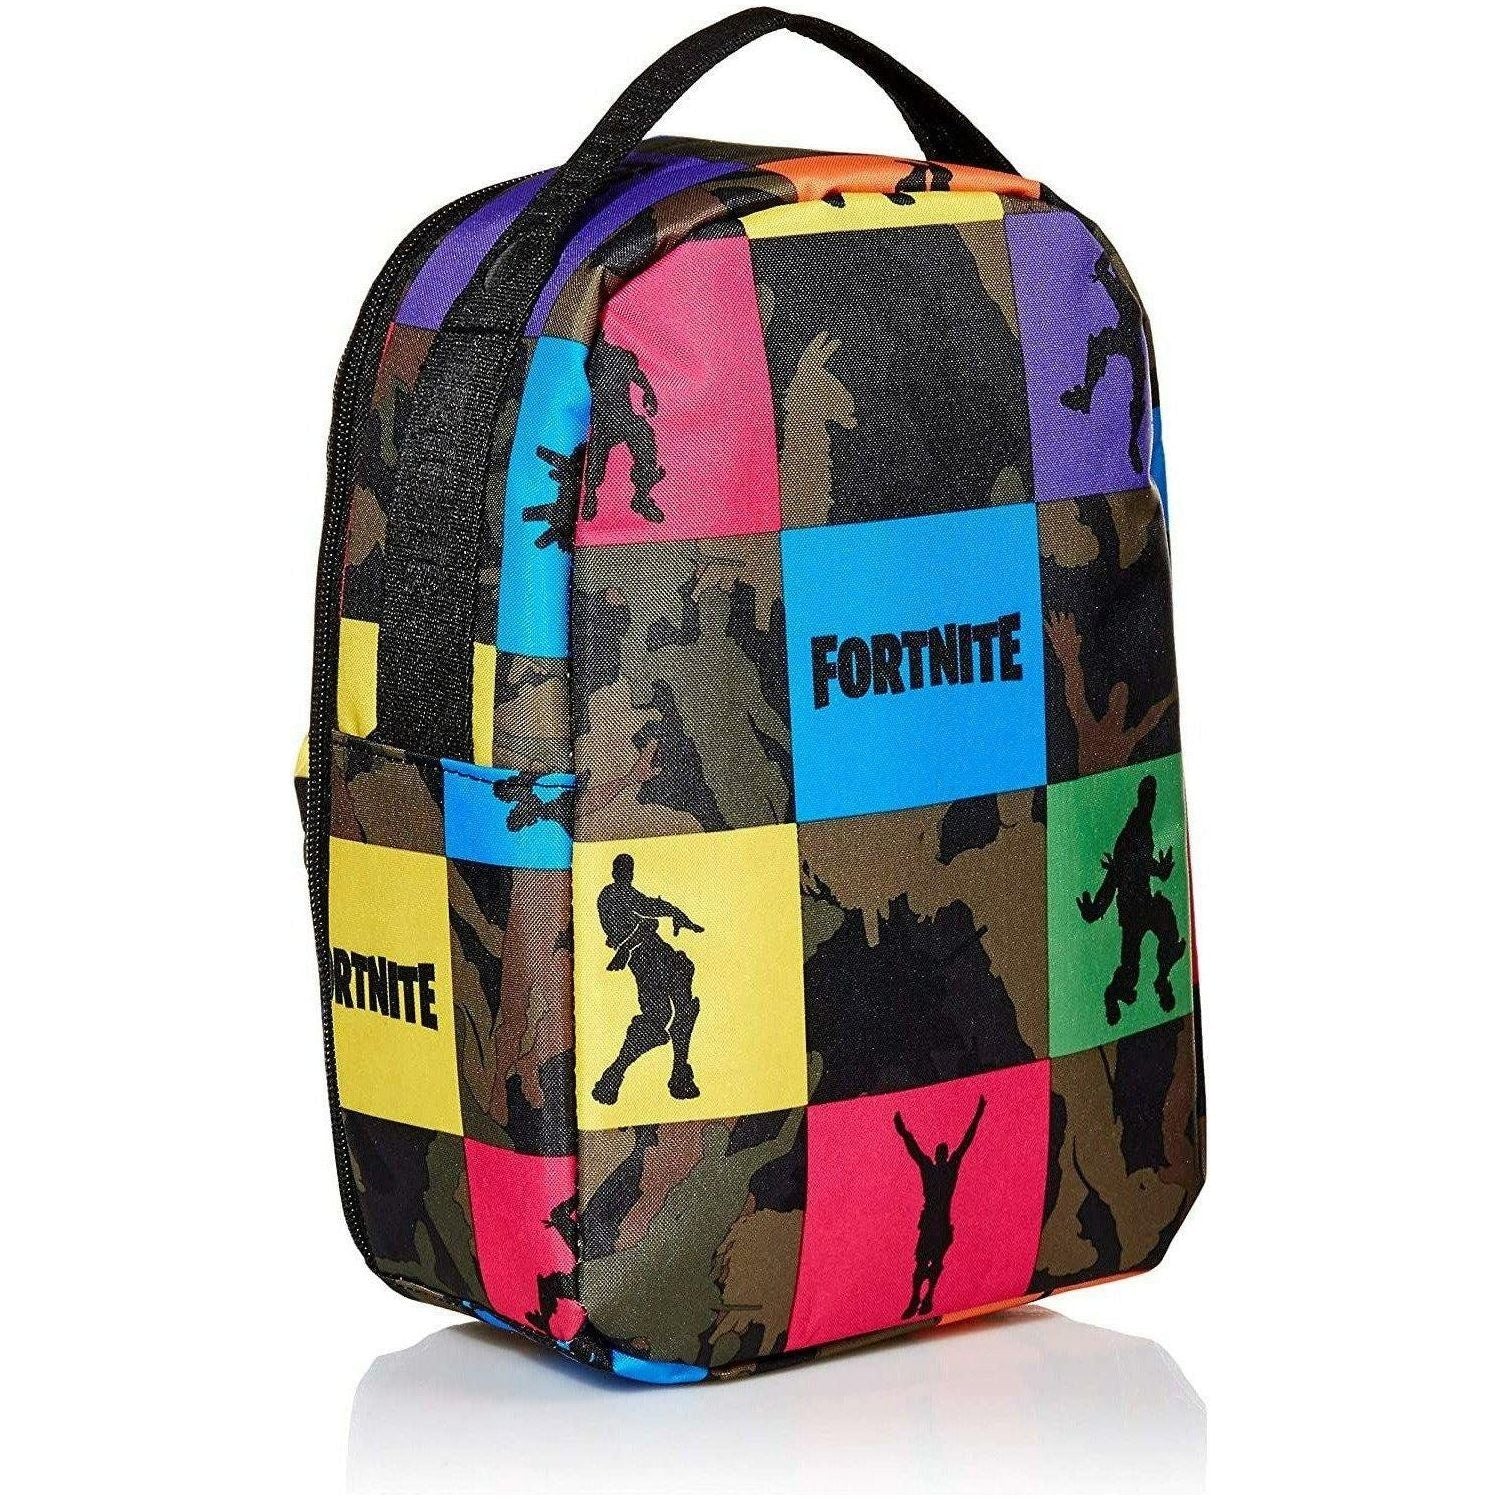 FORTNITE Lunch bag Kit 11 inch - BumbleToys - 2-4 Years, bags, Fortnite, Lunch Bag, Lunch Box, OXE, School Supplies